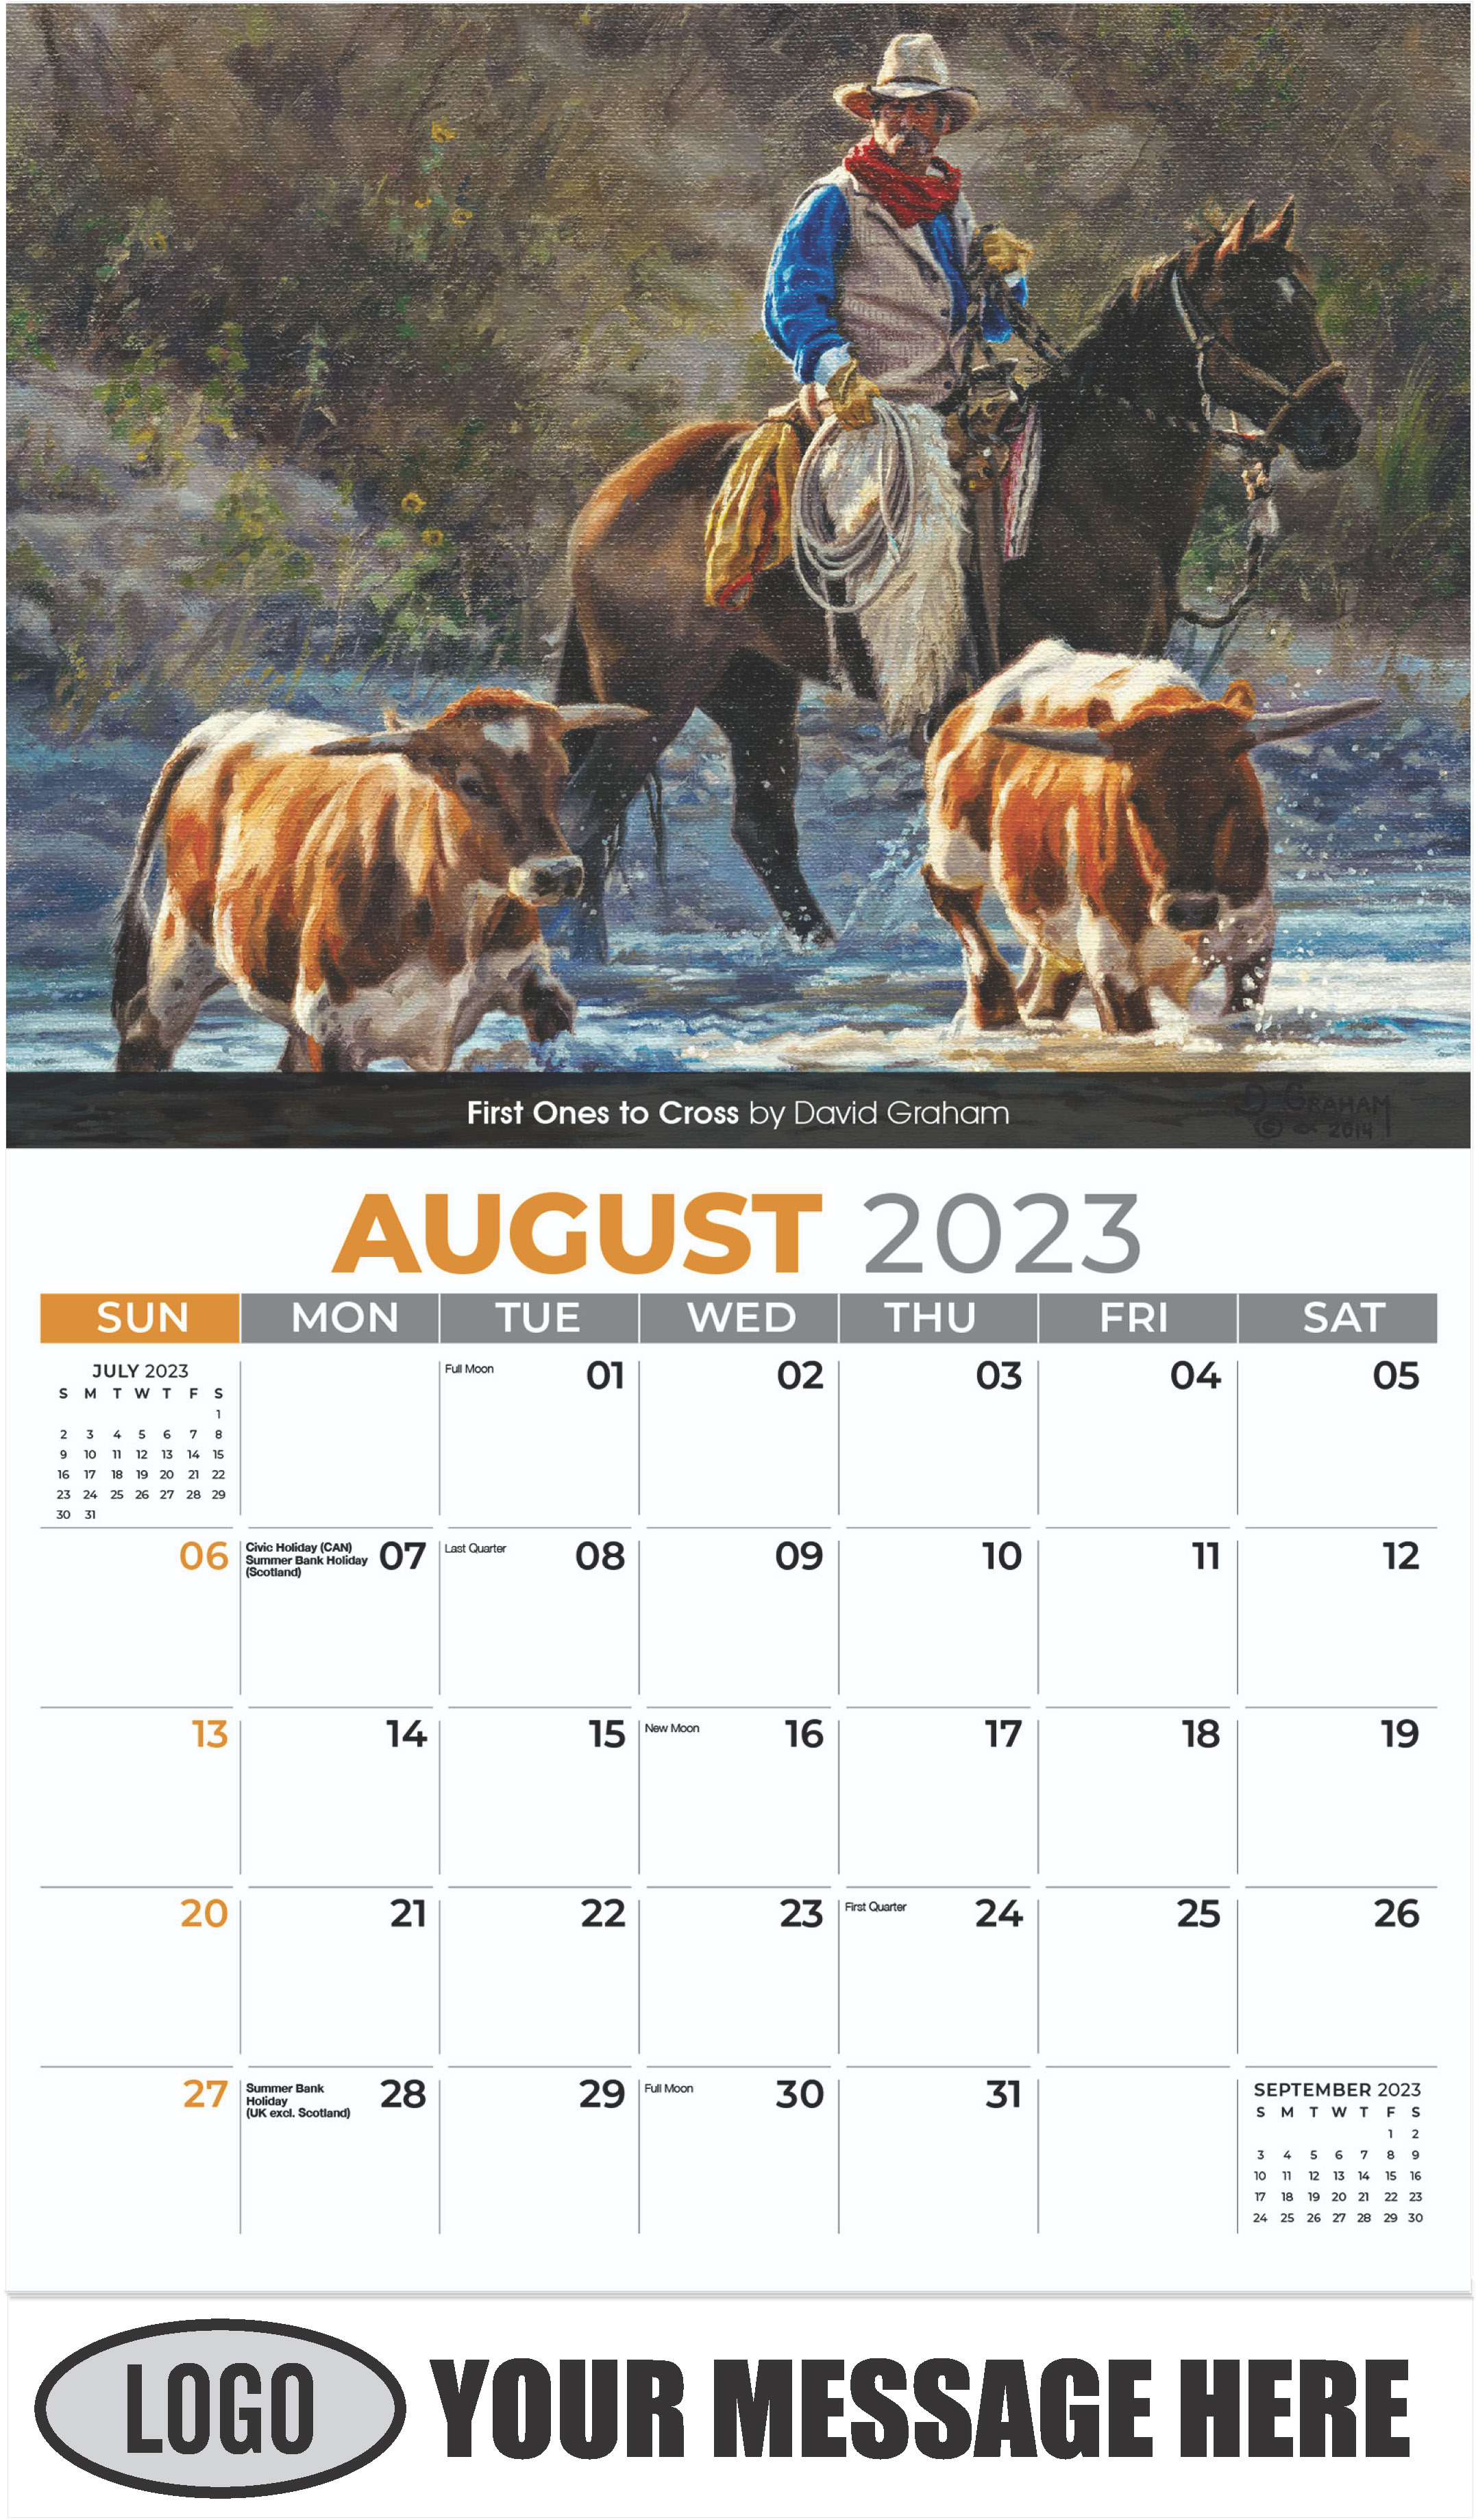 First Ones to Cross by David Graham - August - Spirit of the West 2023 Promotional Calendar